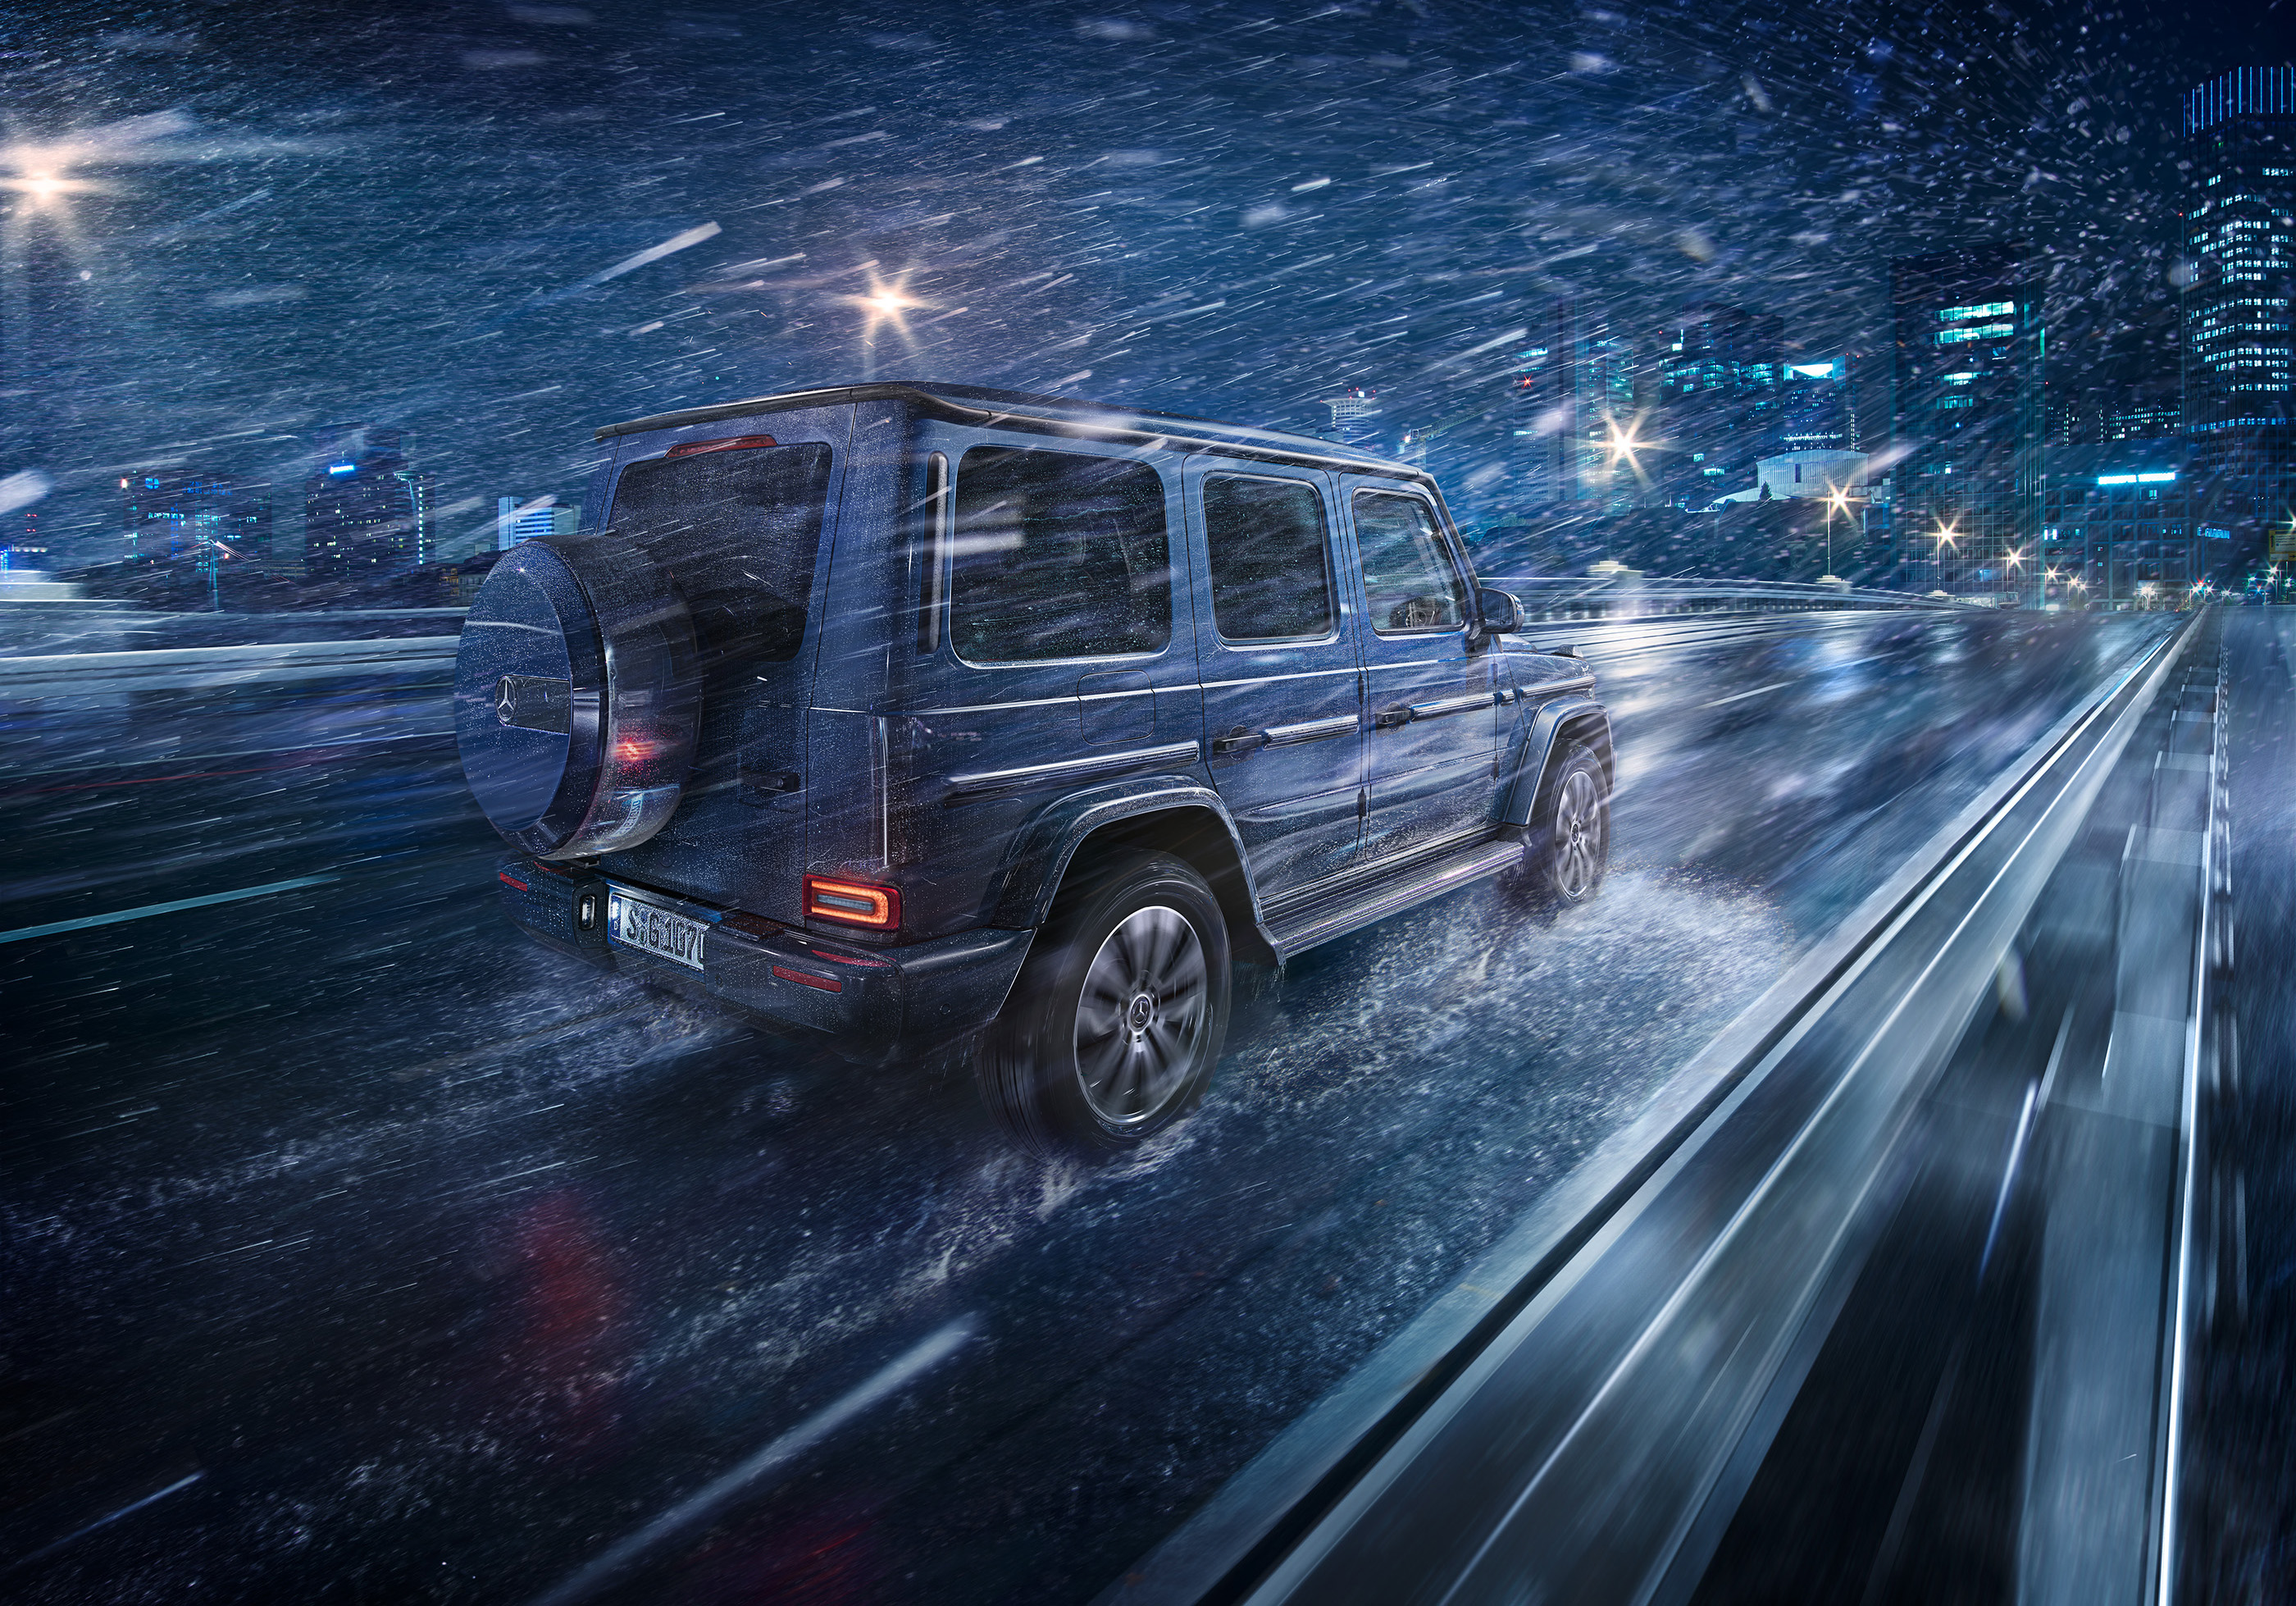 Free photo Mercedes-Benz G-Class driving at night in rainy weather